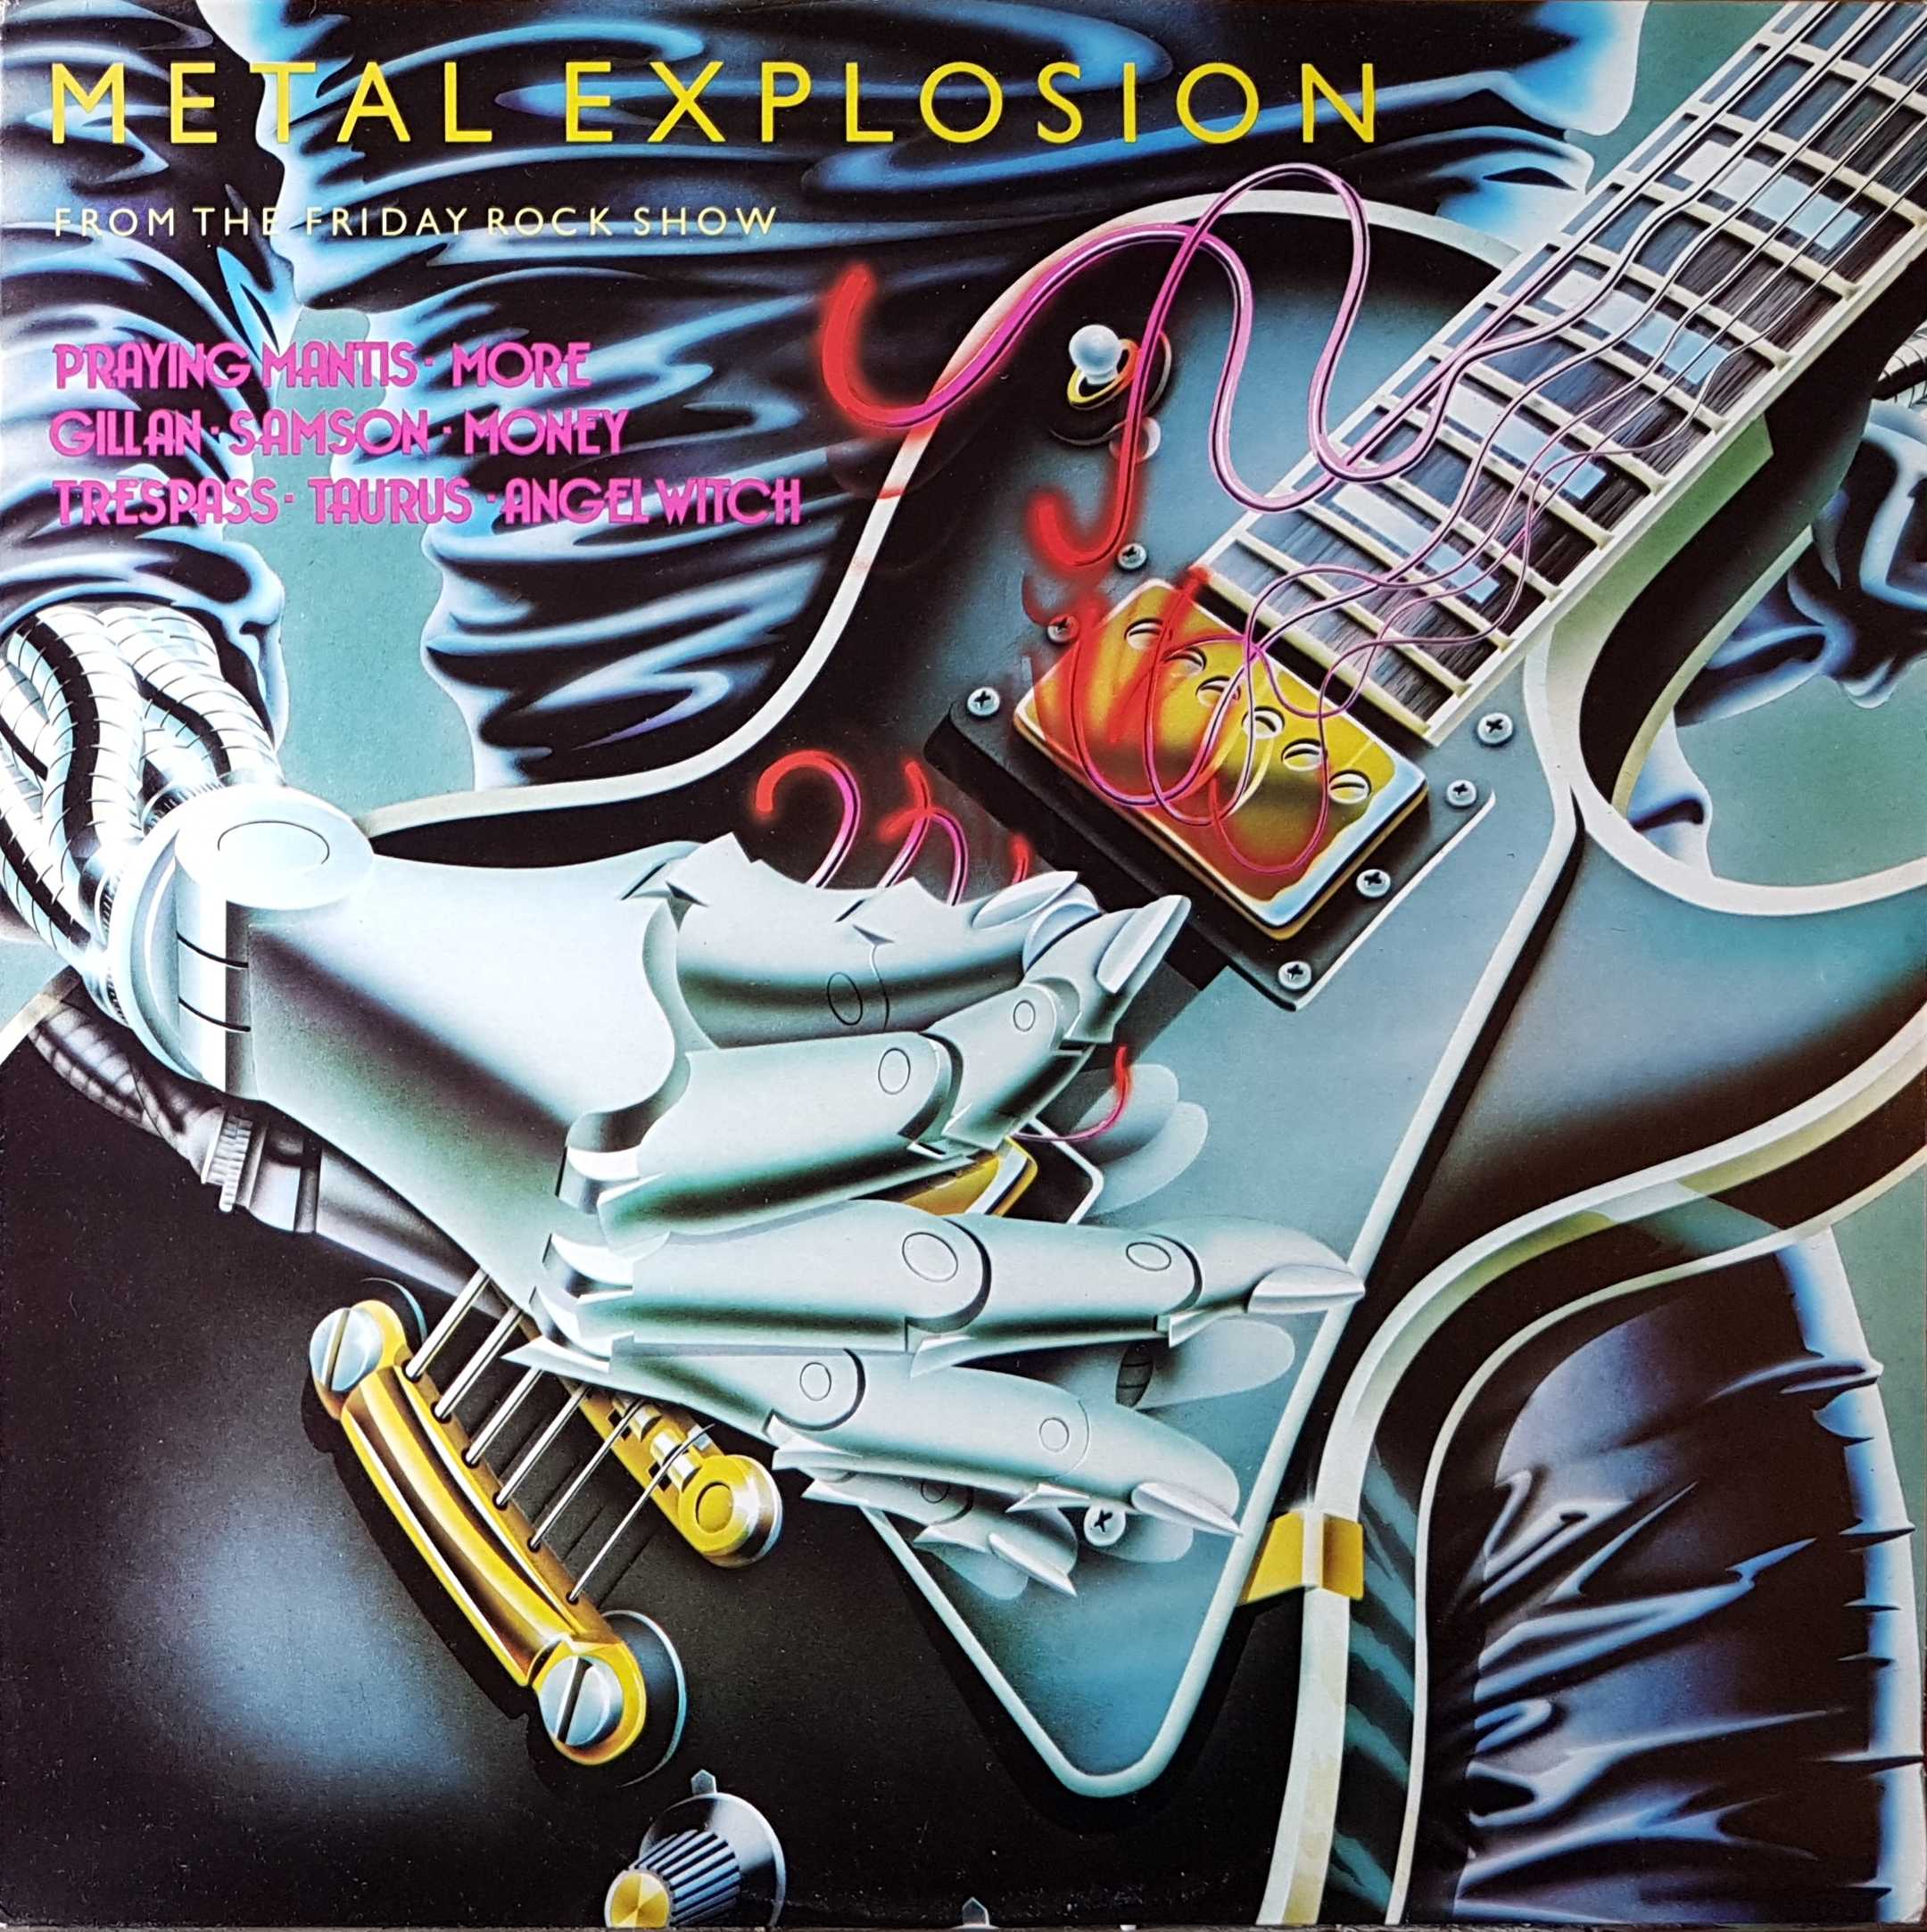 Picture of REH 397 Metal explosion from the Friday Rock Show by artist Various from the BBC albums - Records and Tapes library